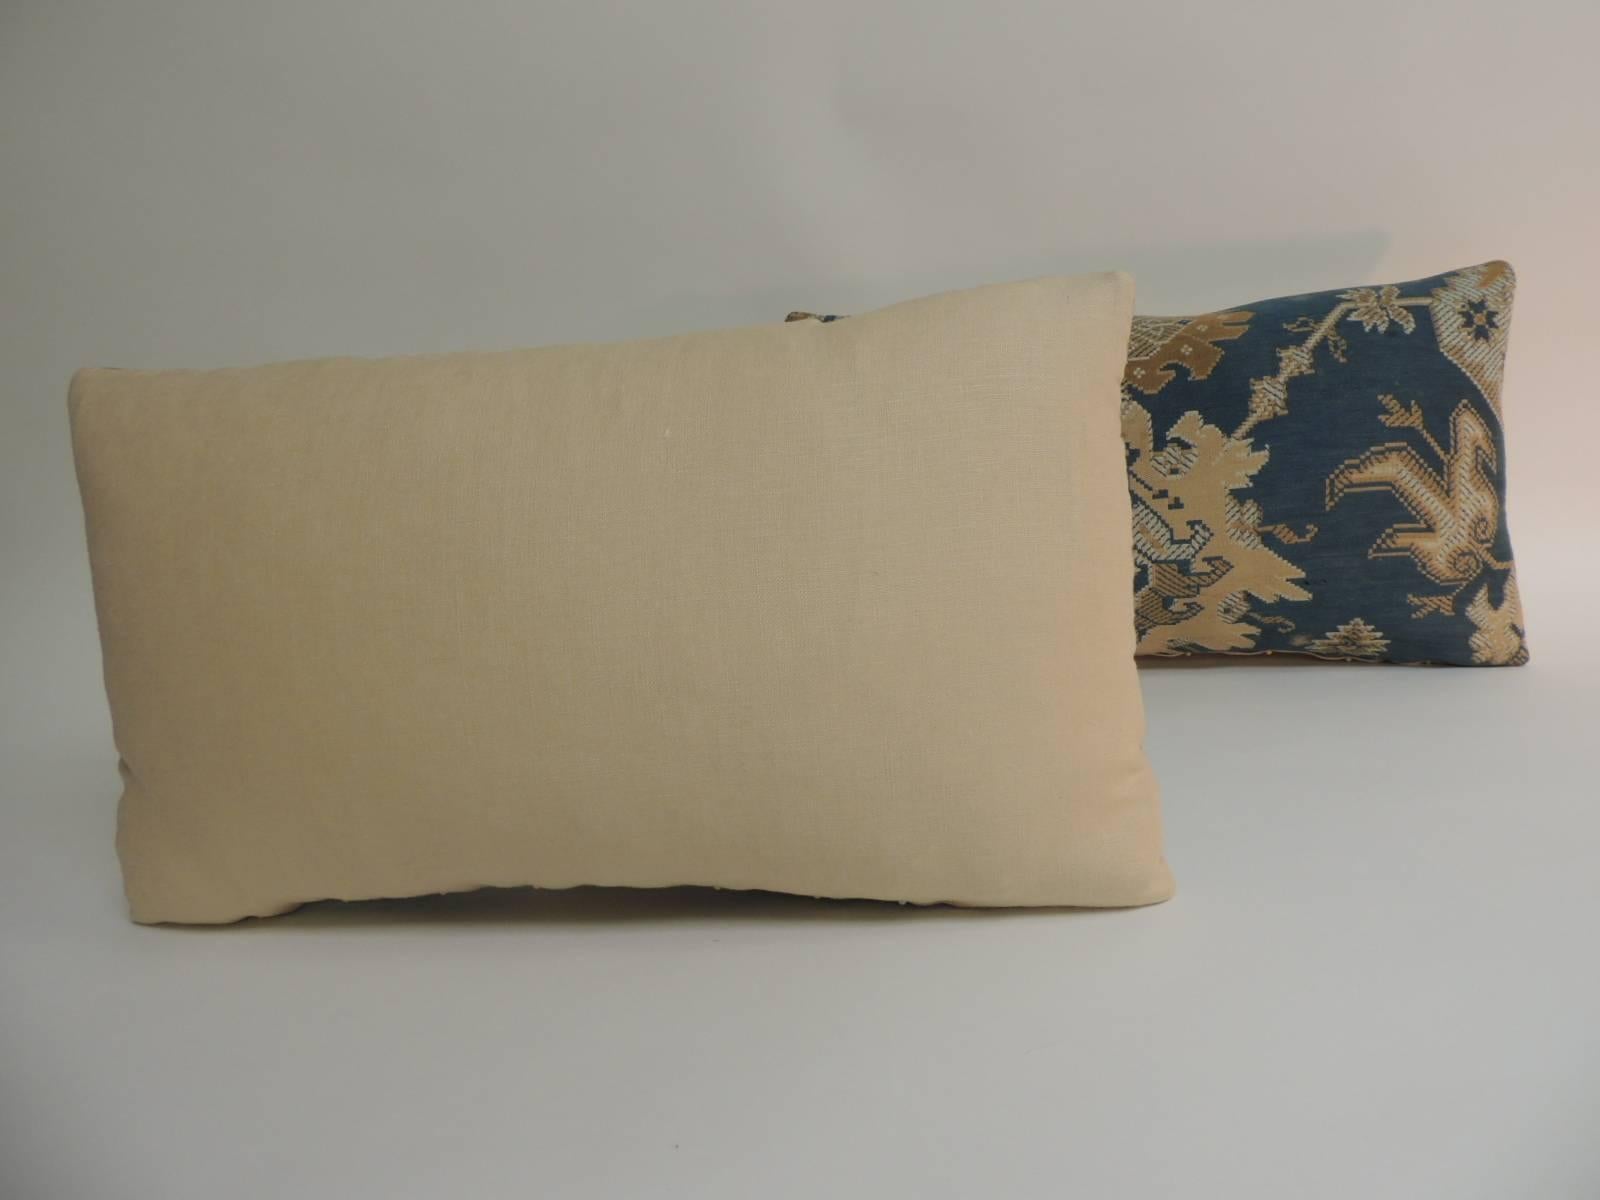 Hand-Crafted Pair of 19th Century Arts & Crafts Tan and Blue Decorative Lumbar Pillows